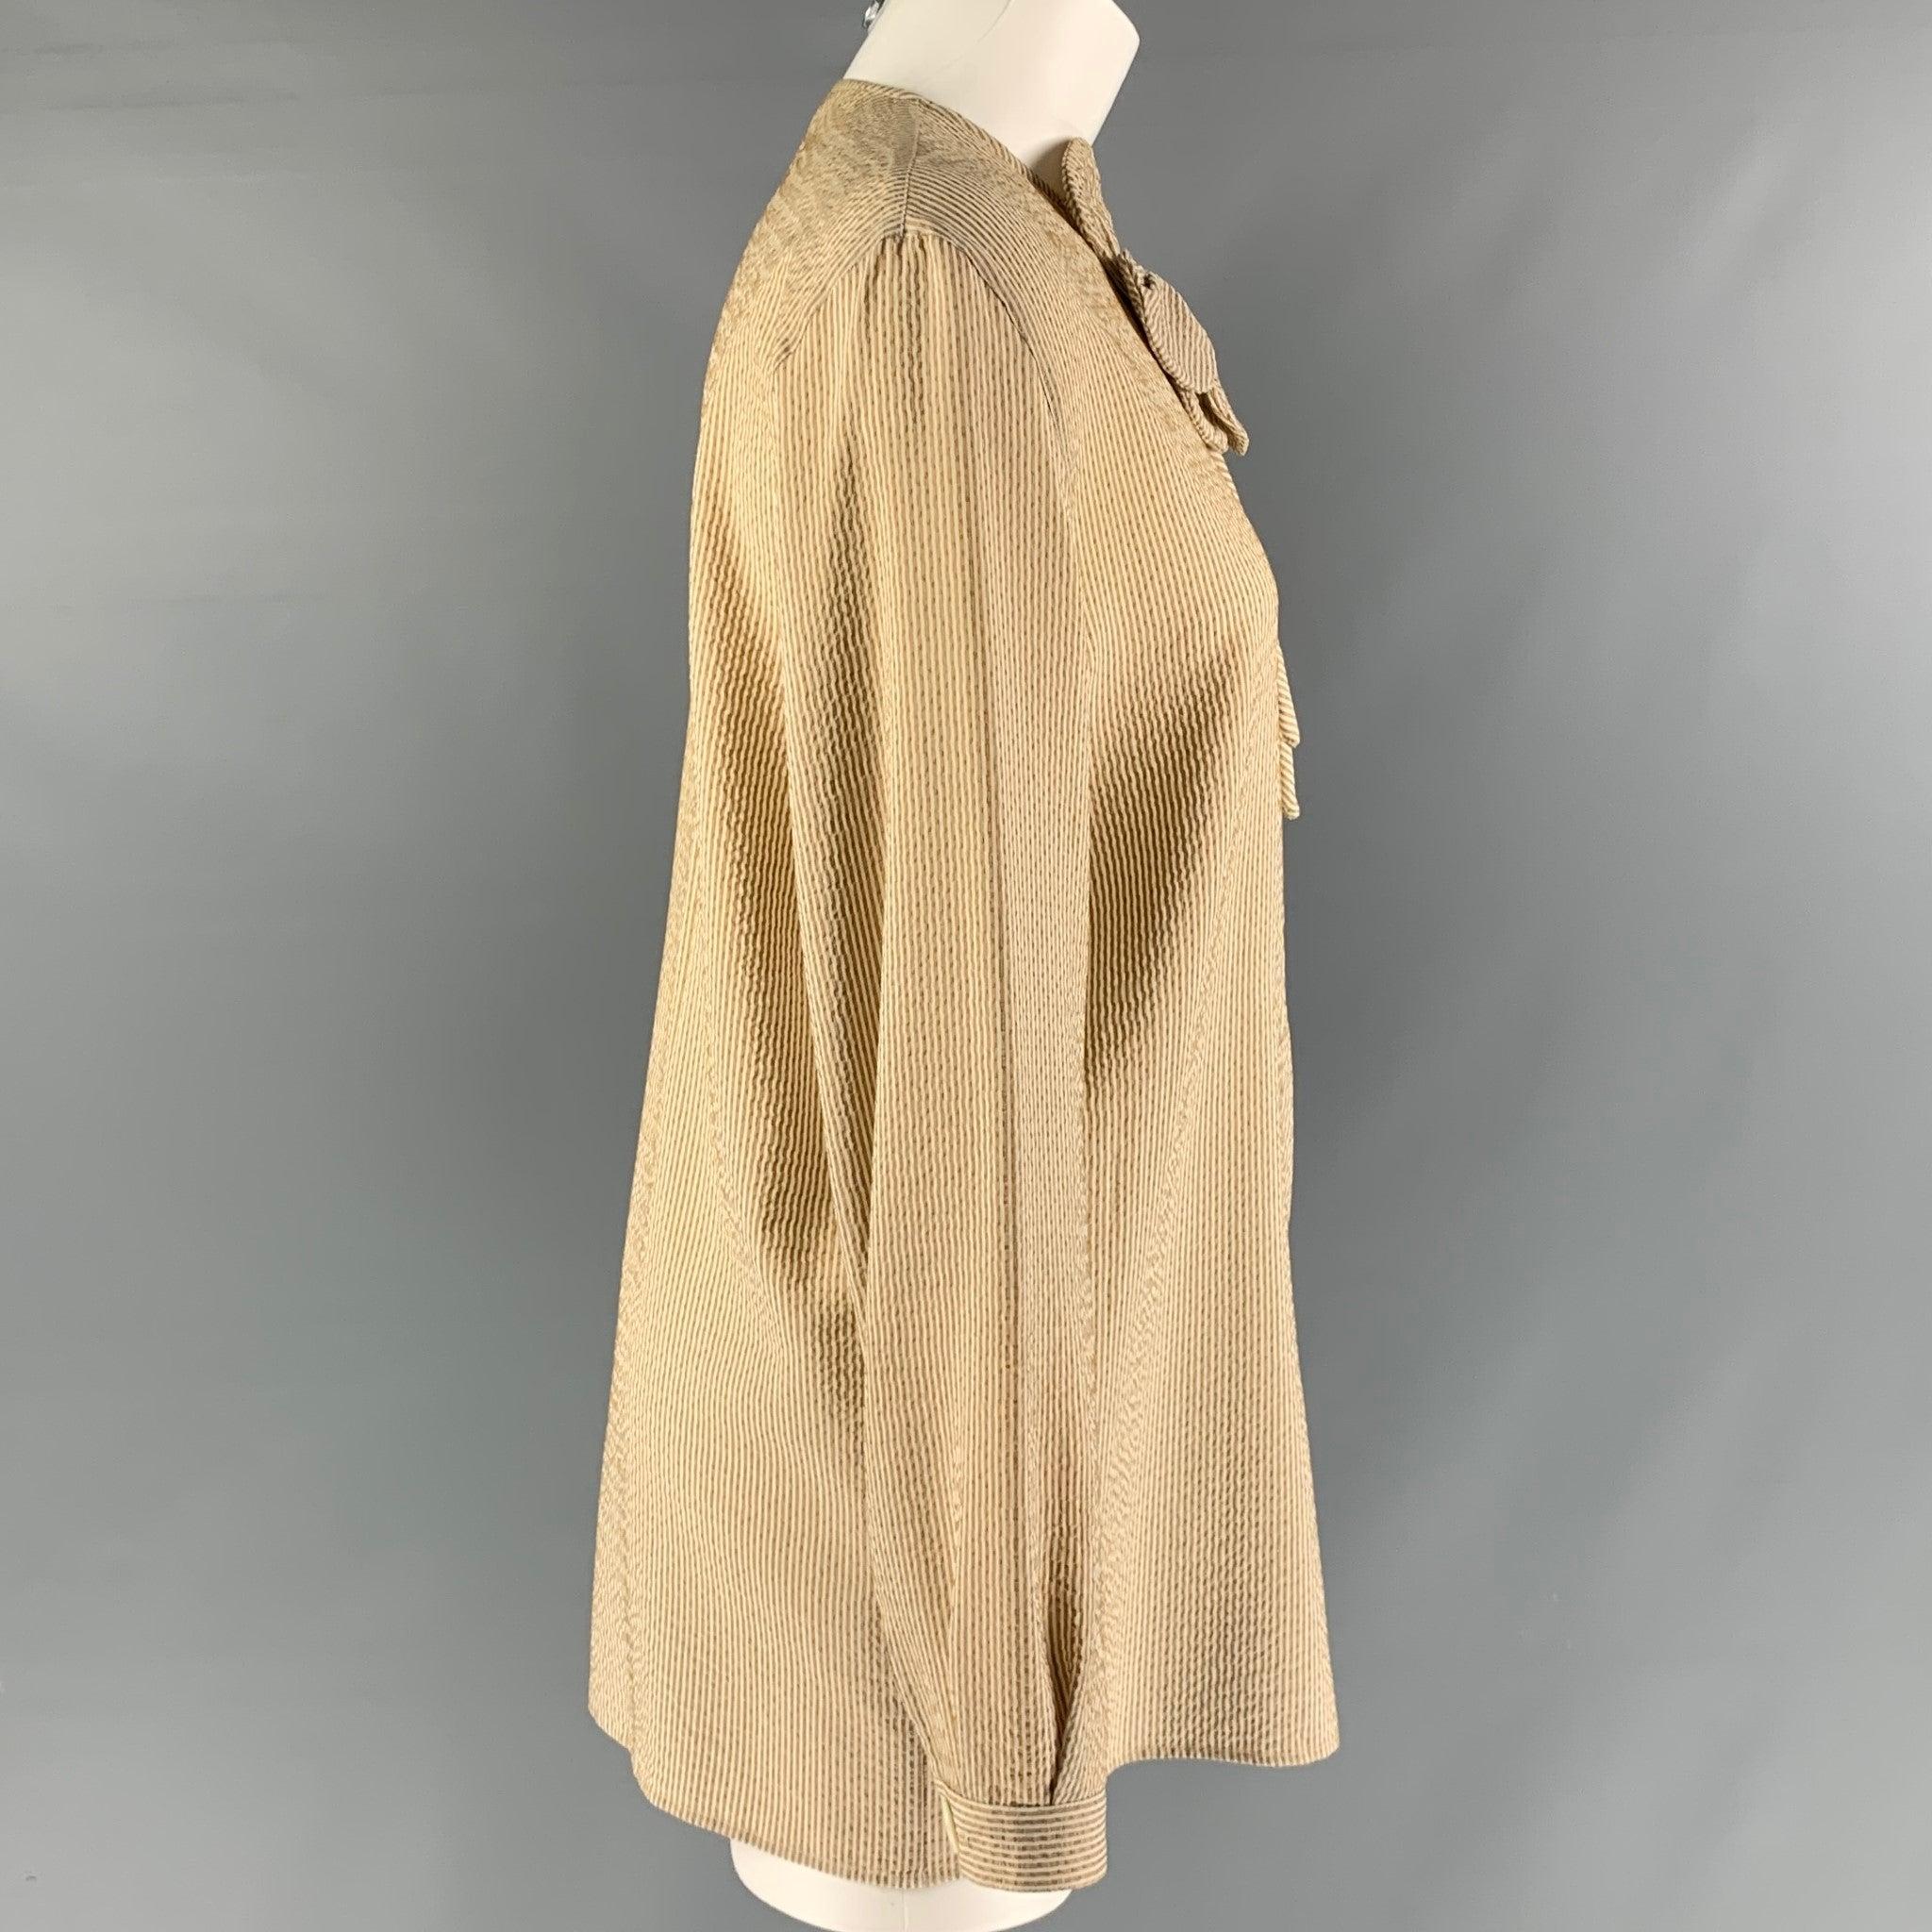 GIORGIO ARMANI vintage long sleeve blouse comes in beige striped silk features a handmade fabric flower detail at front and button down closure. Made in Italy.Excellent Pre-Owned Condition.  
 

 Marked:  42 
 

 Measurements: 
  
 Shoulder: 16